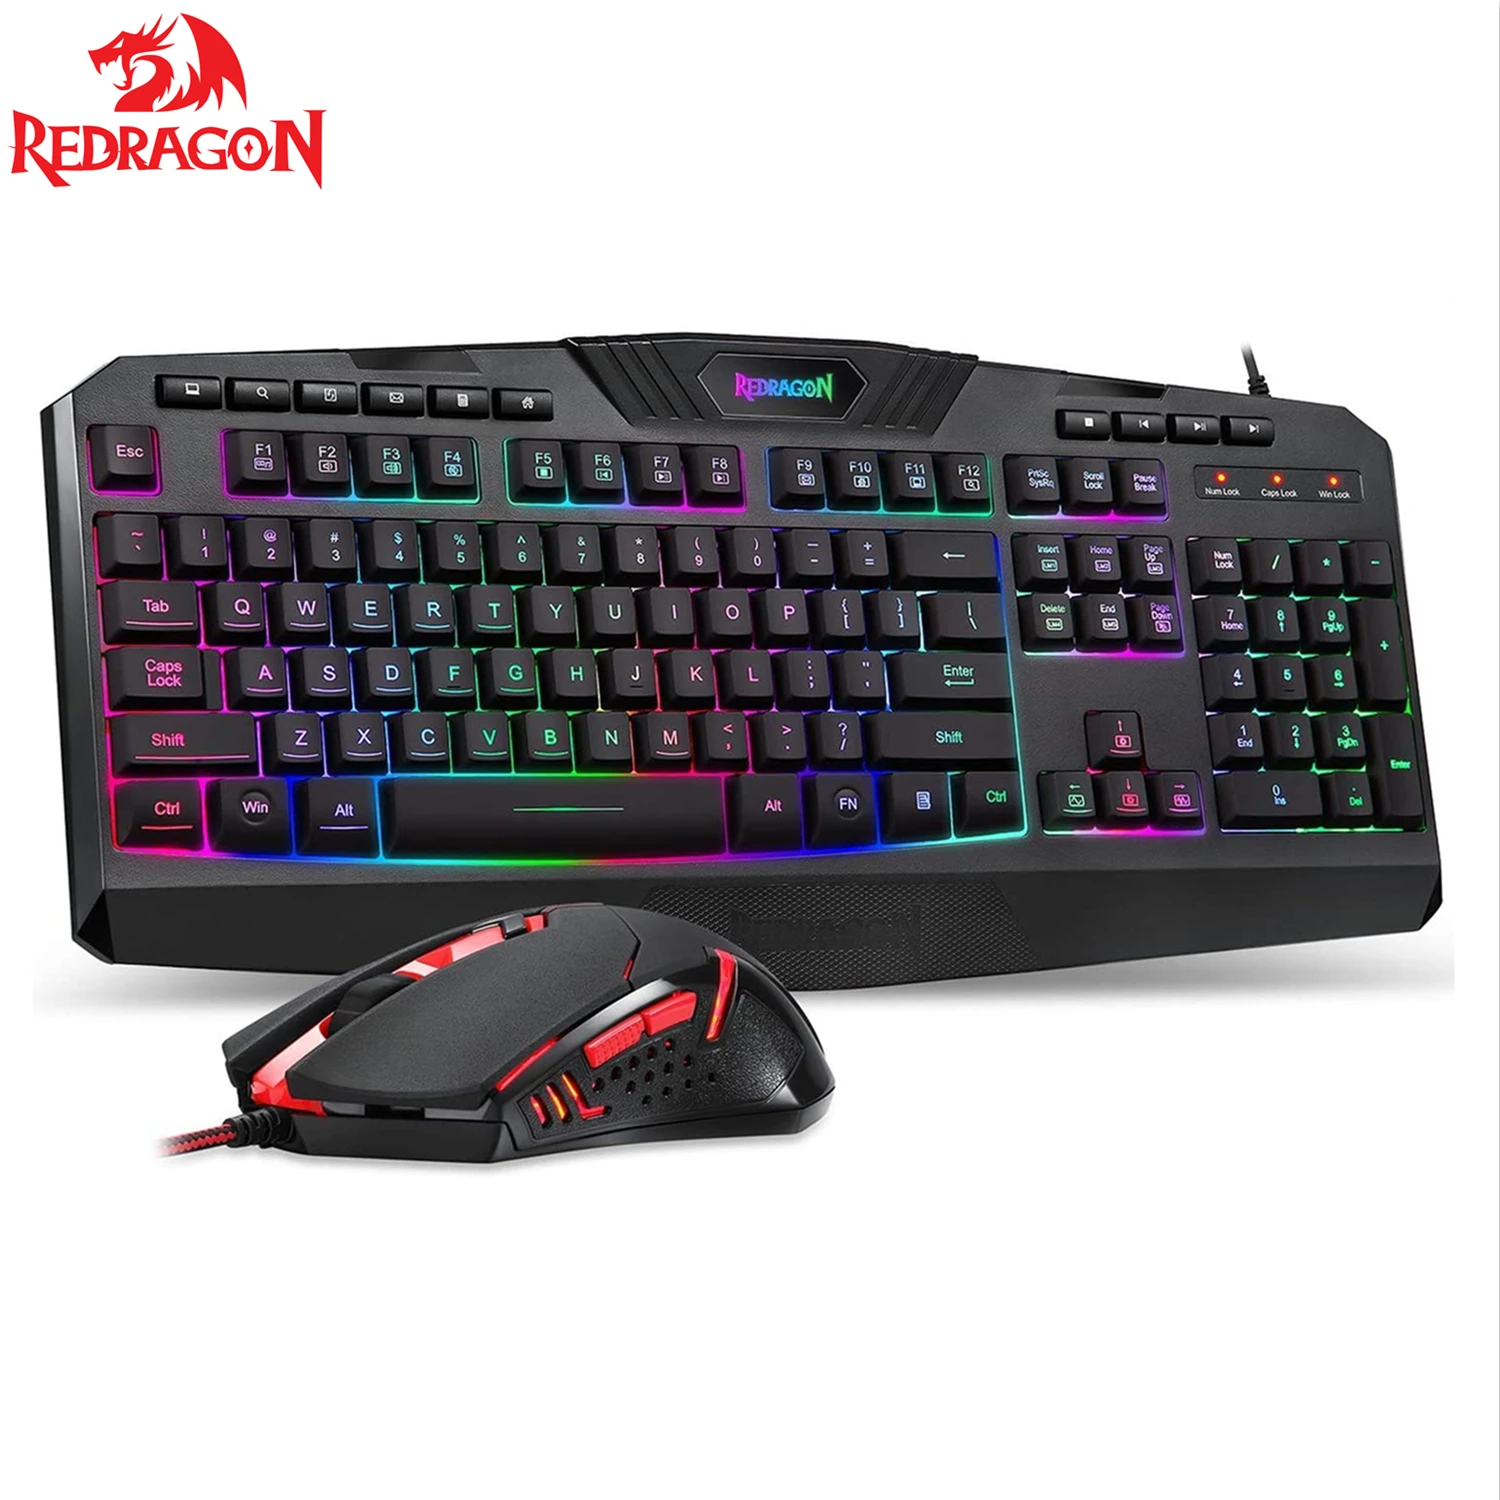 Mouse Combo Rgb Backlit 3200 Dpi Keyboard Mouse Set For Windows Pc Gamers